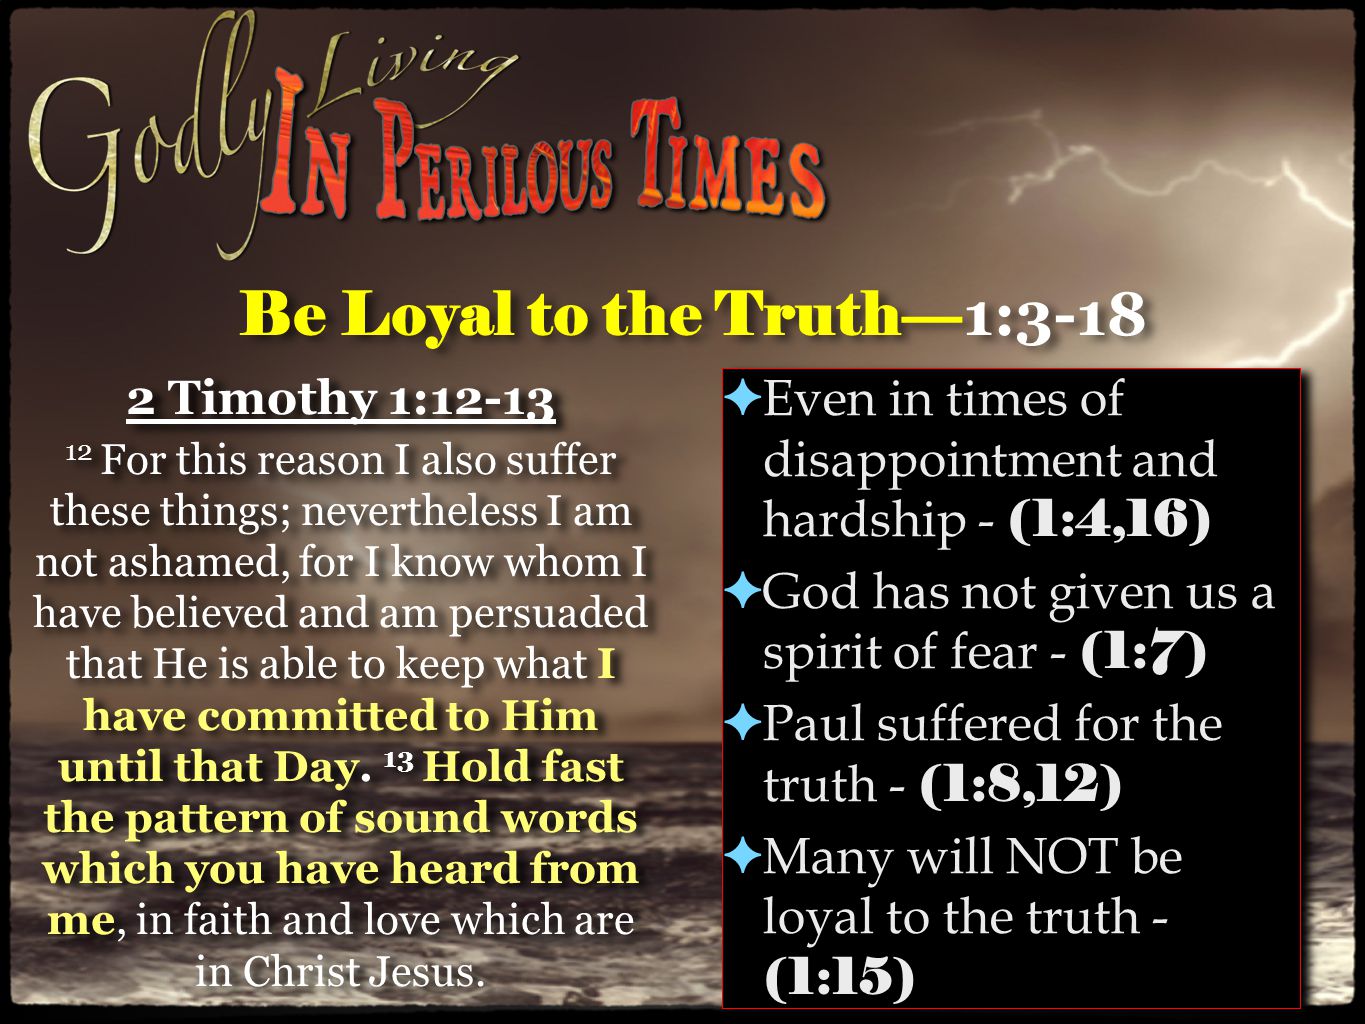 Be Loyal to the Truth— 1: Timothy 1: For this reason I also suffer these things; nevertheless I am not ashamed, for I know whom I have believed and am persuaded that He is able to keep what I have committed to Him until that Day.